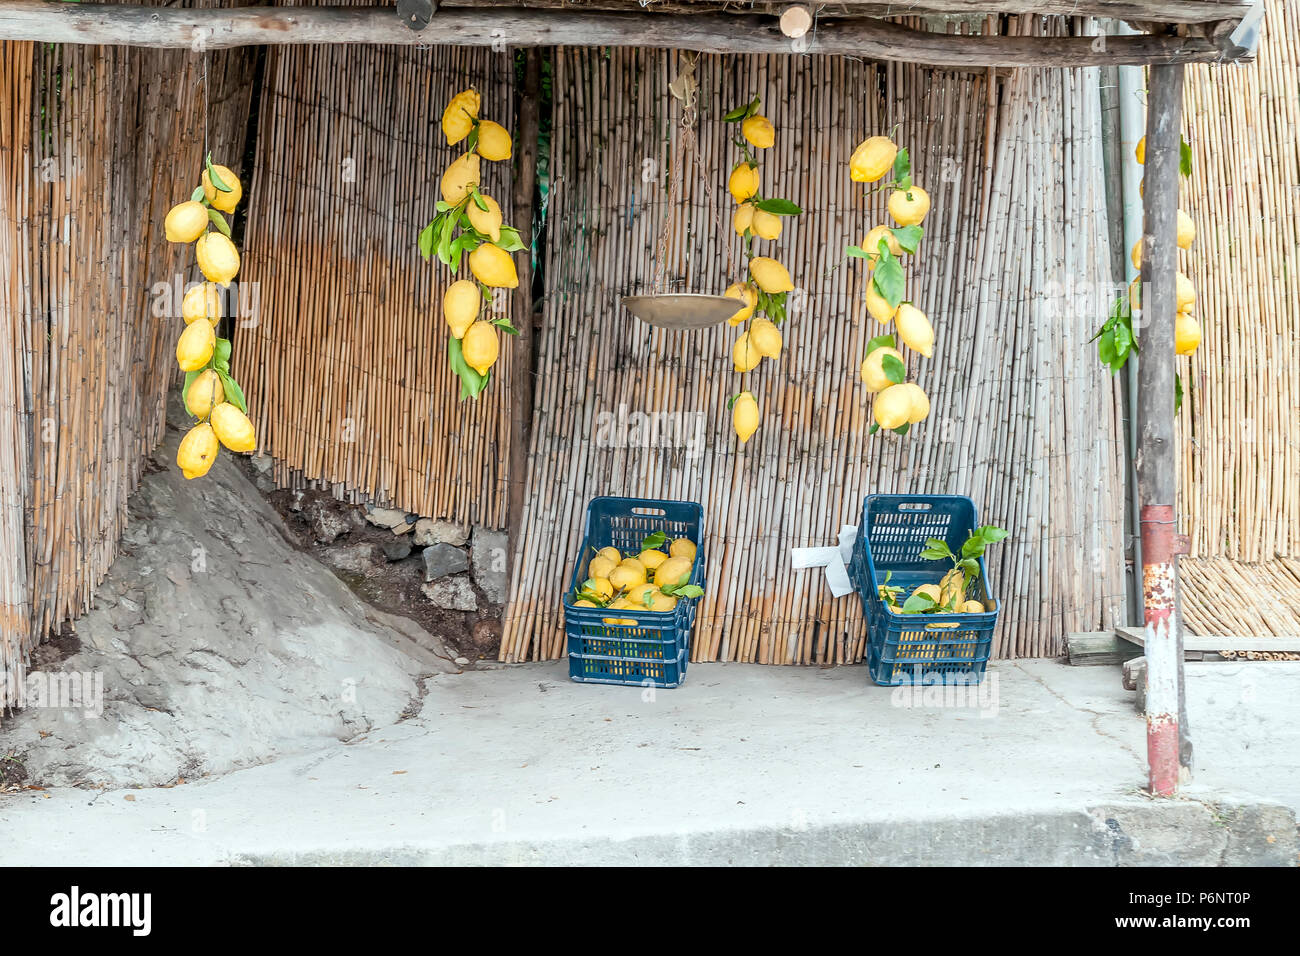 Typical stand of large lemons for sale on the Amalfi Coast, Campania, Italy Stock Photo